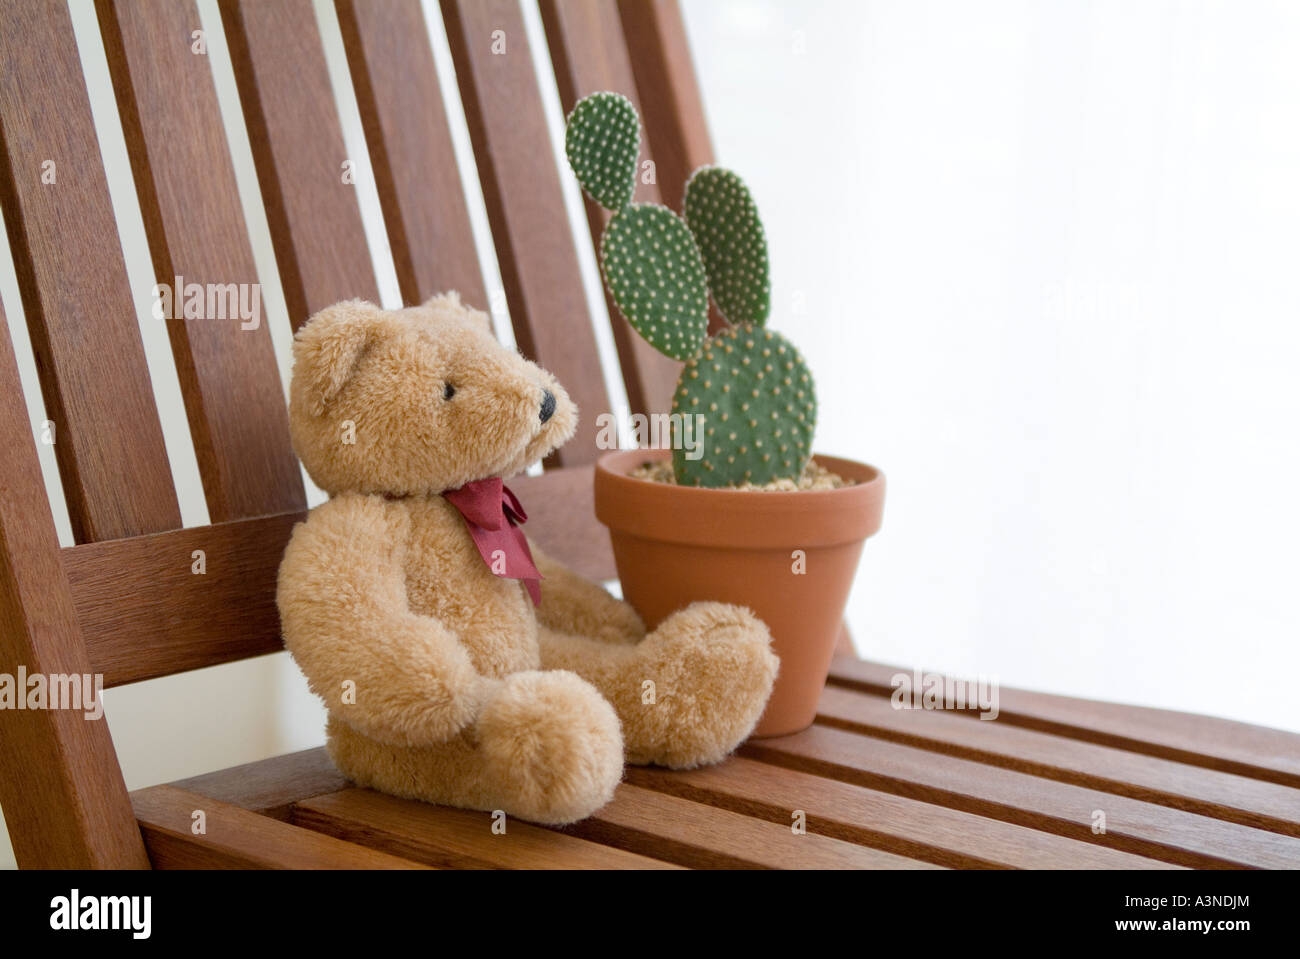 Potted cactus plant and stuffed animal on chair Stock Photo